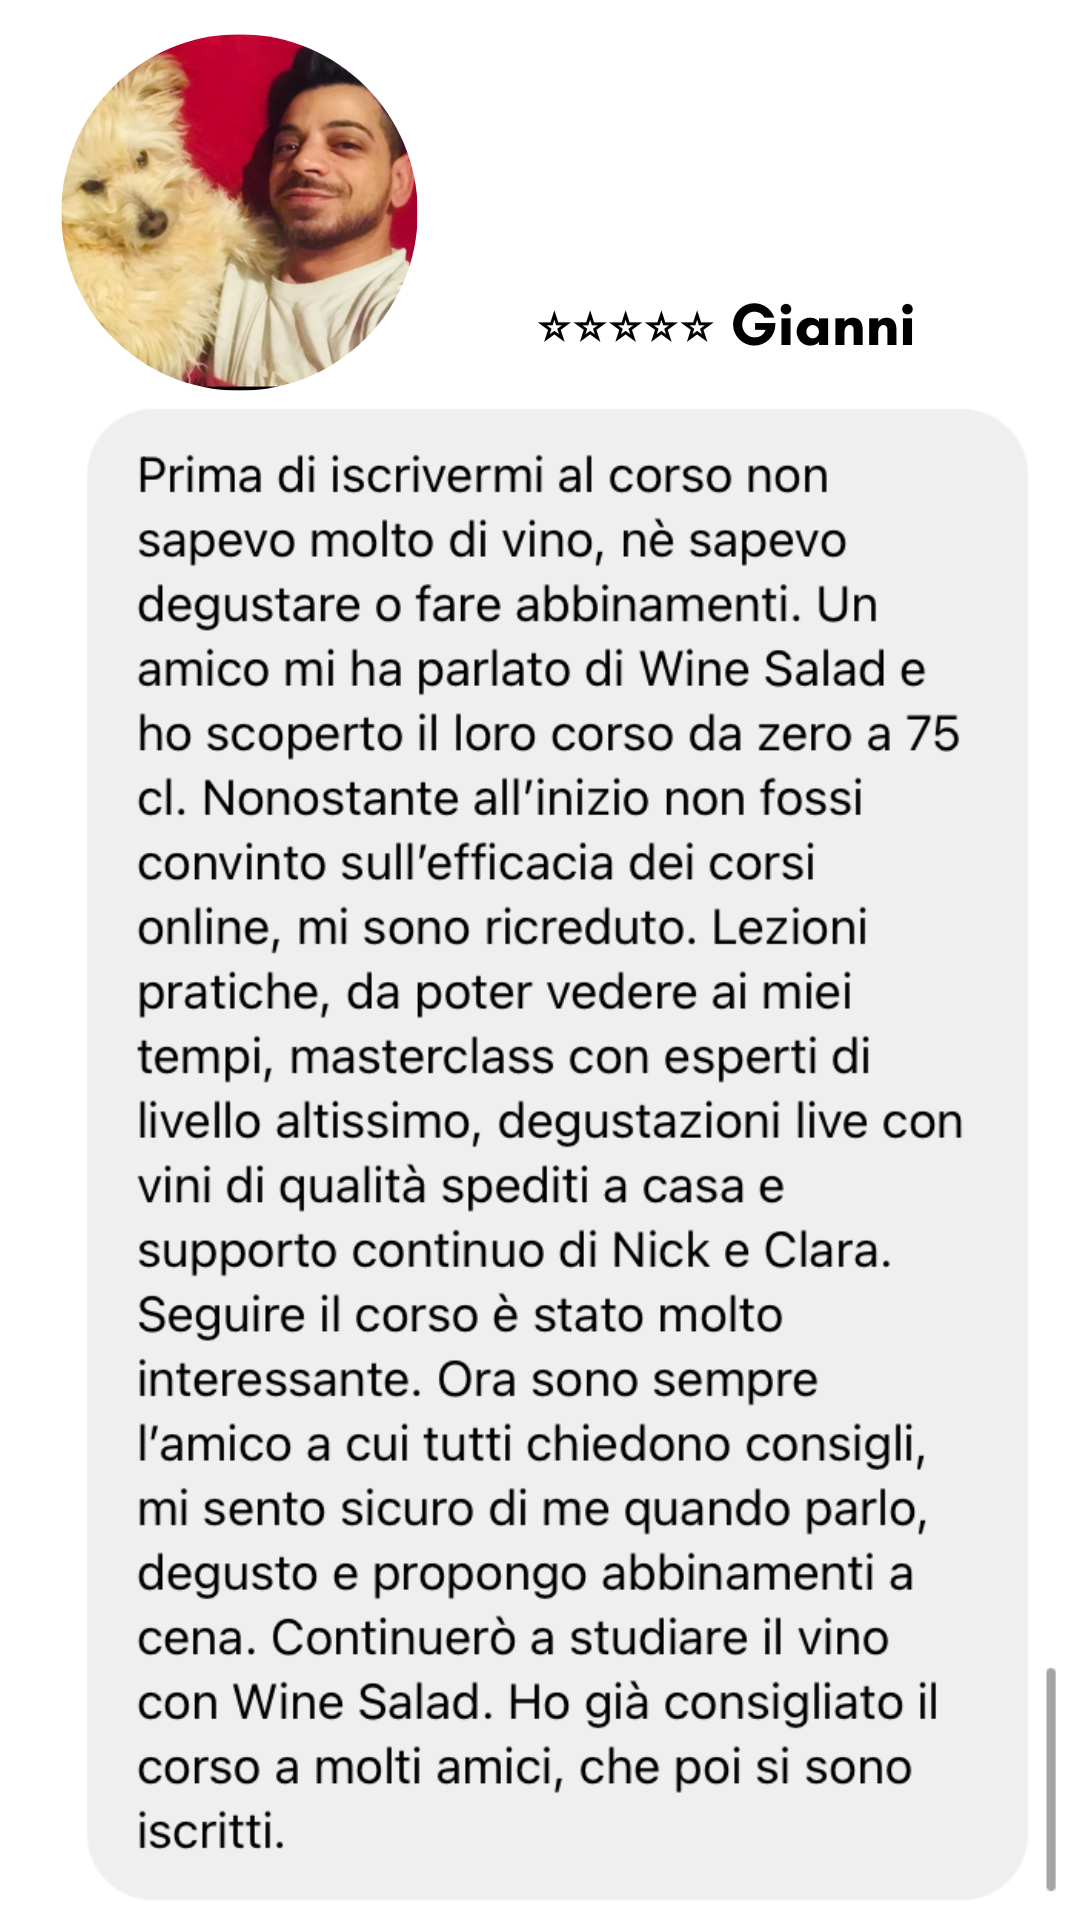 Recensione Gianni.png